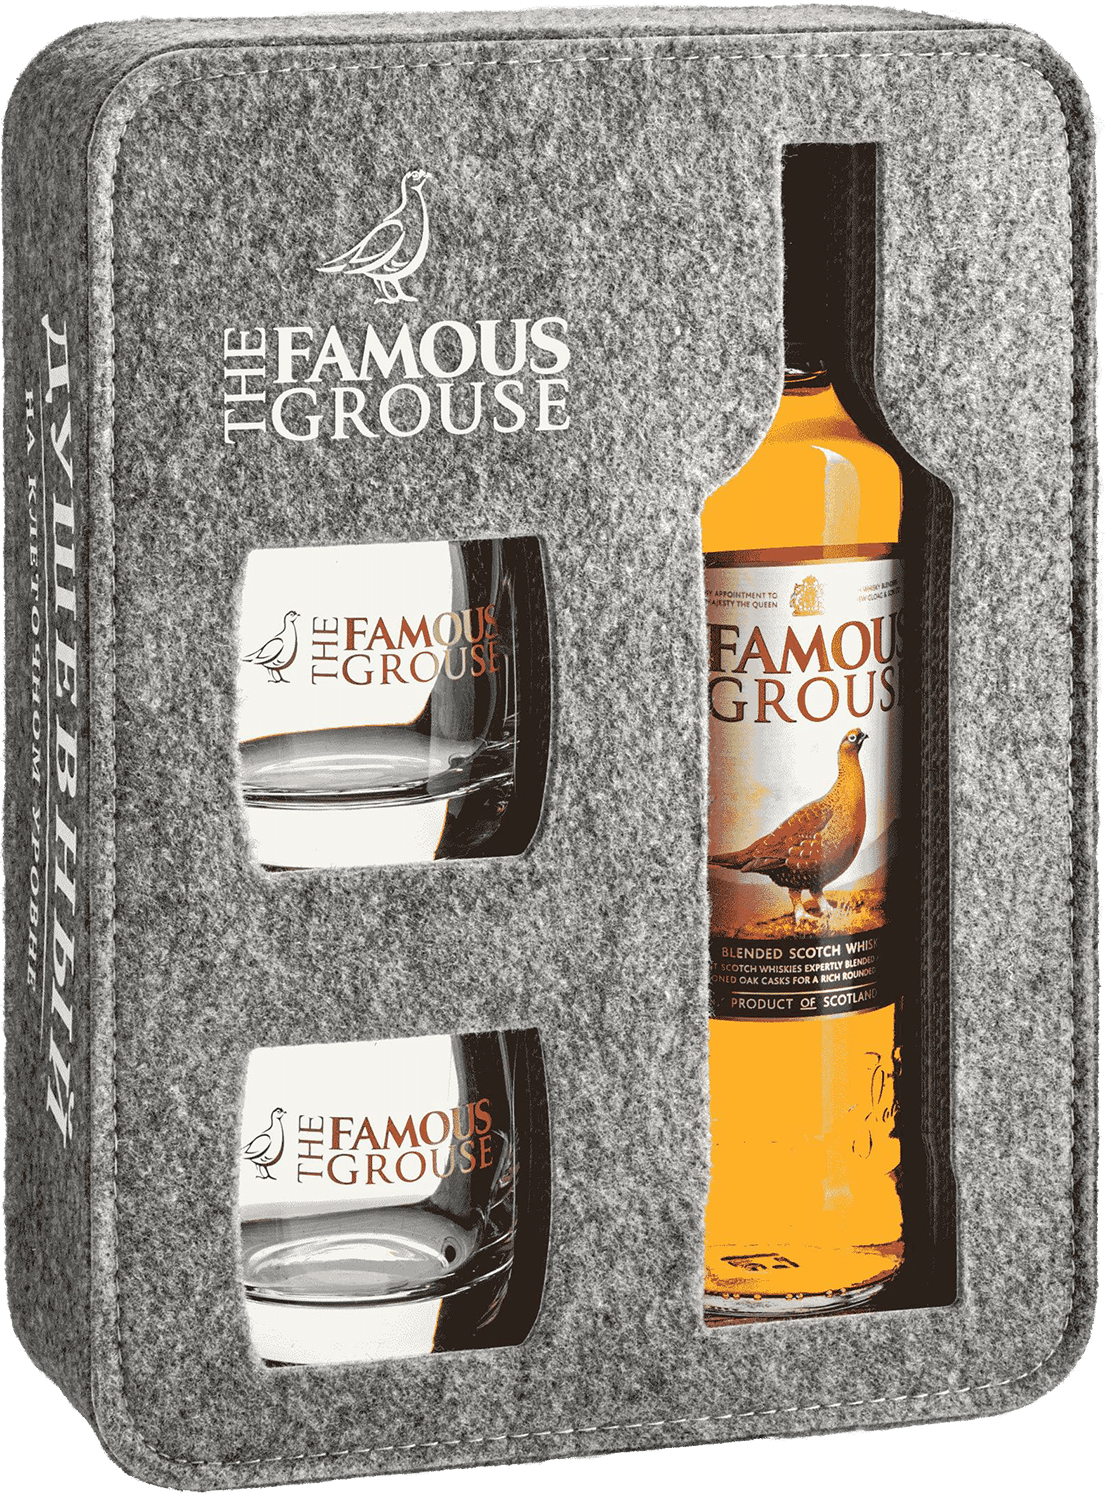 Famous Grouse 3 y.o. Blended Scotch Whisky (gift box with two glasses)